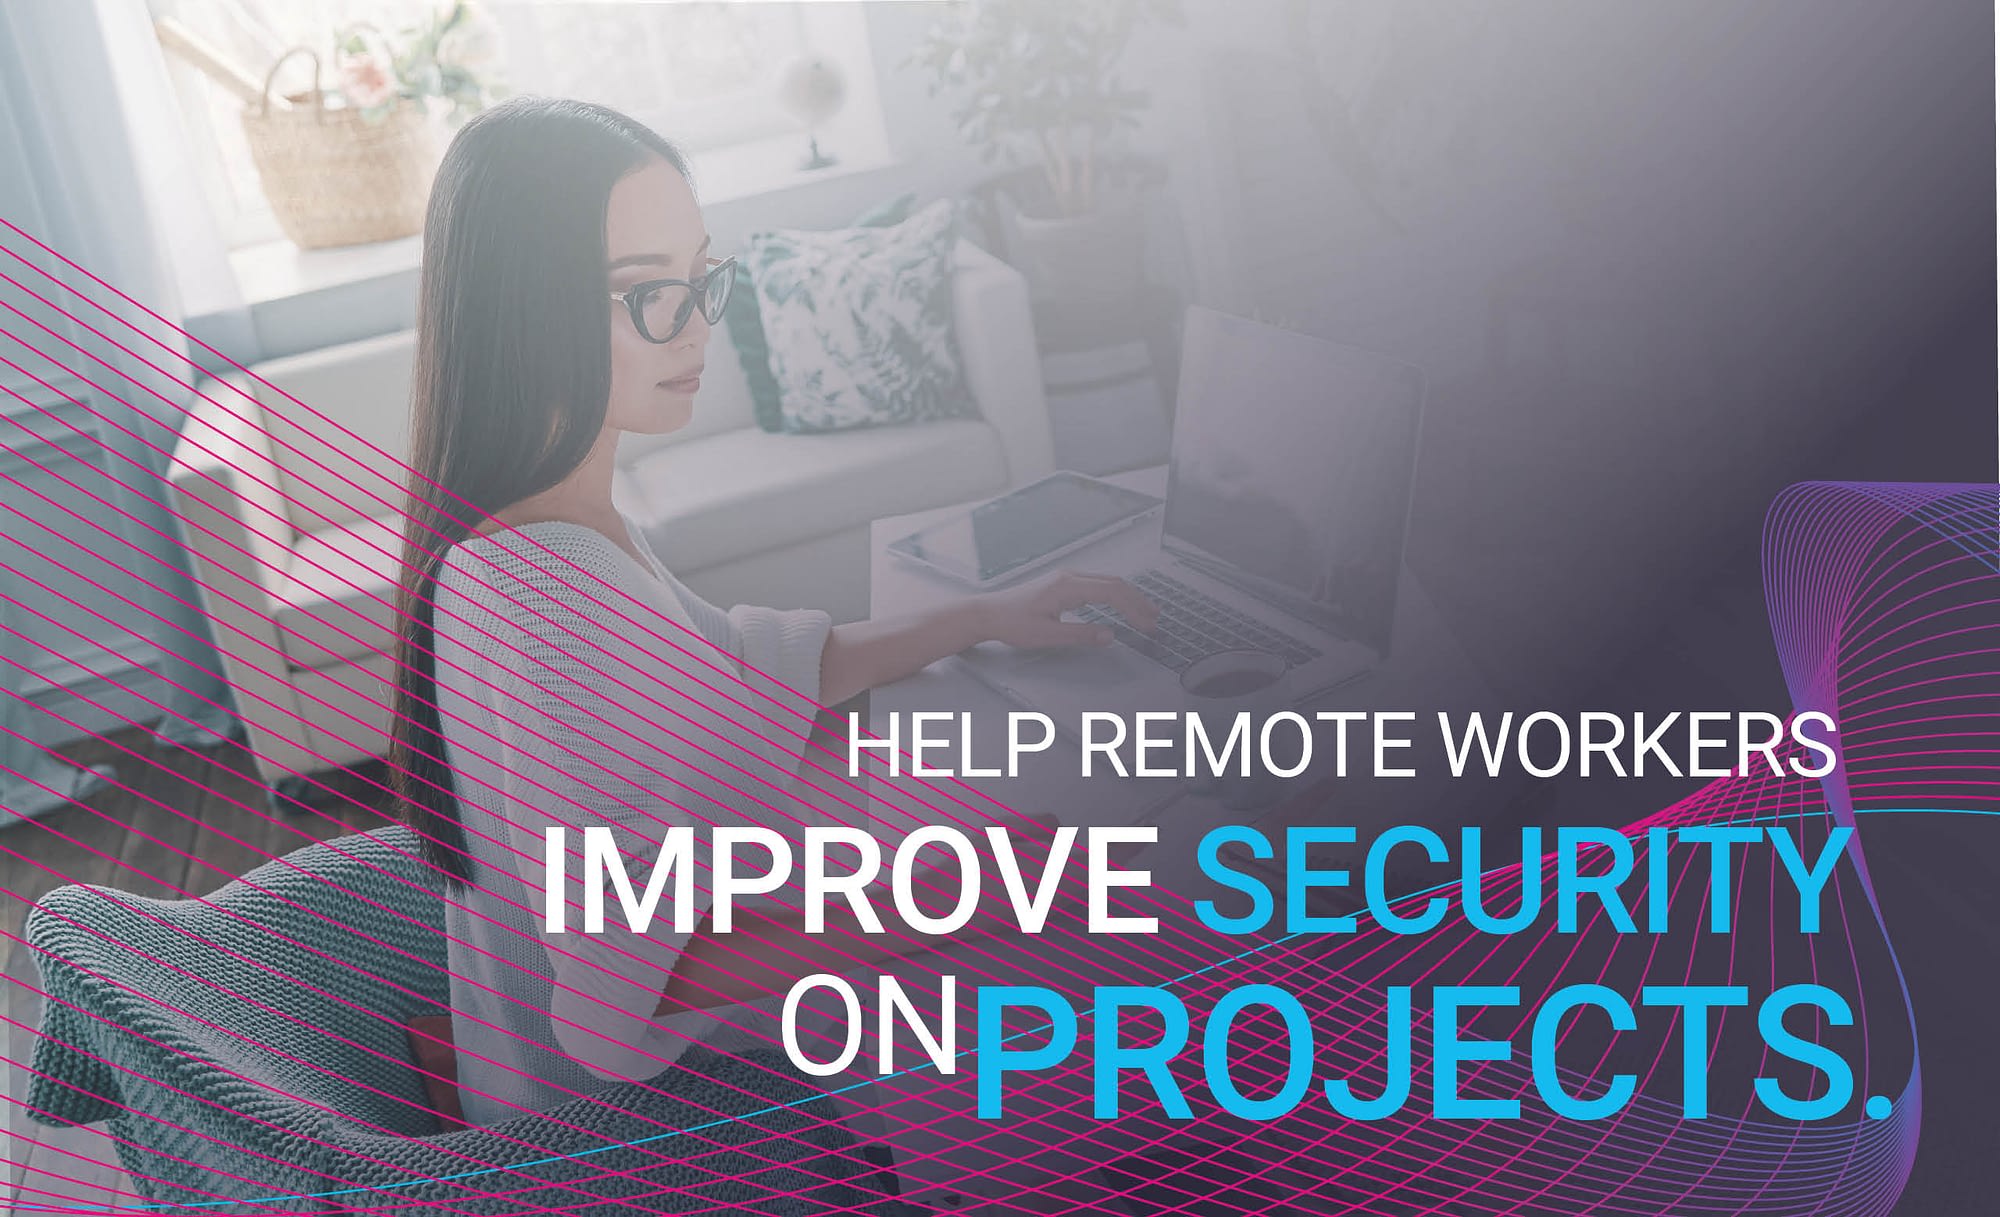 How business leaders can help to improve security on projects for remote workers in 2020 and 2021.